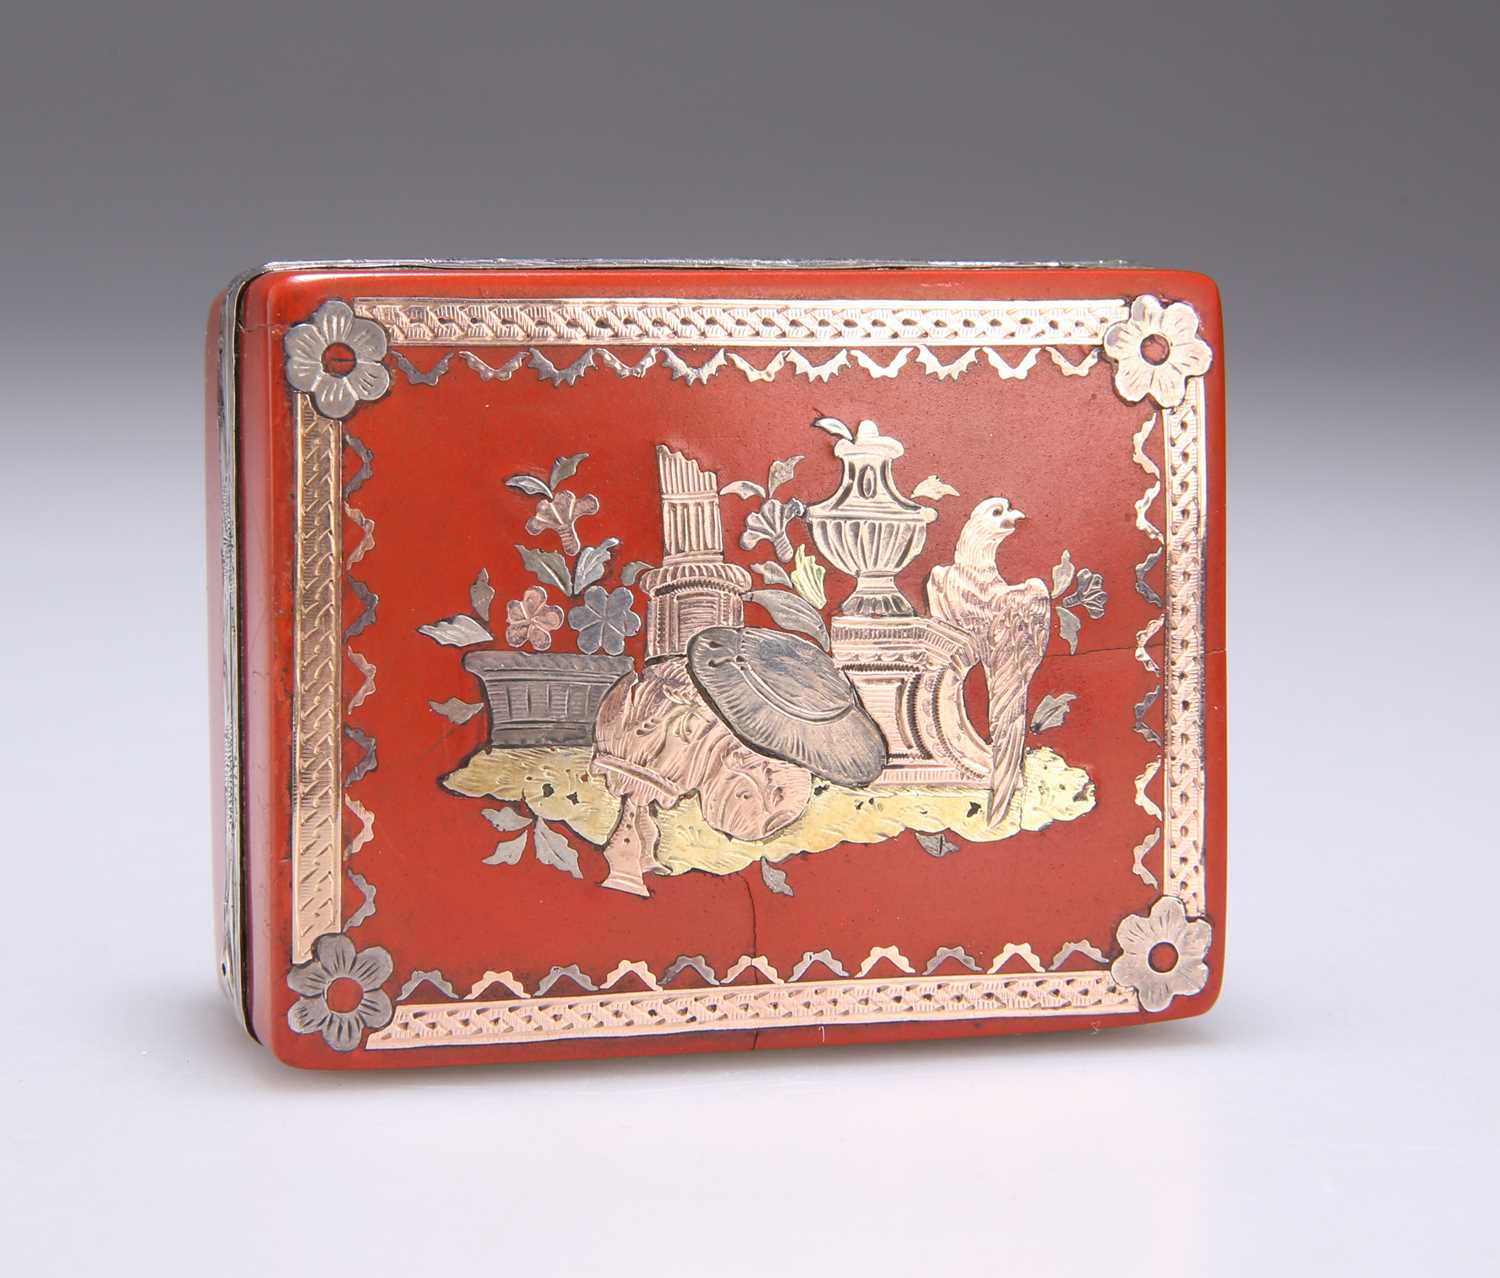 A LOUIS XVI SILVER-MOUNTED TRI-COLOUR GOLD INLAID RED LACQUER BOÎTE-À-MOUCHES, CIRCA 1775-80 - Image 2 of 4